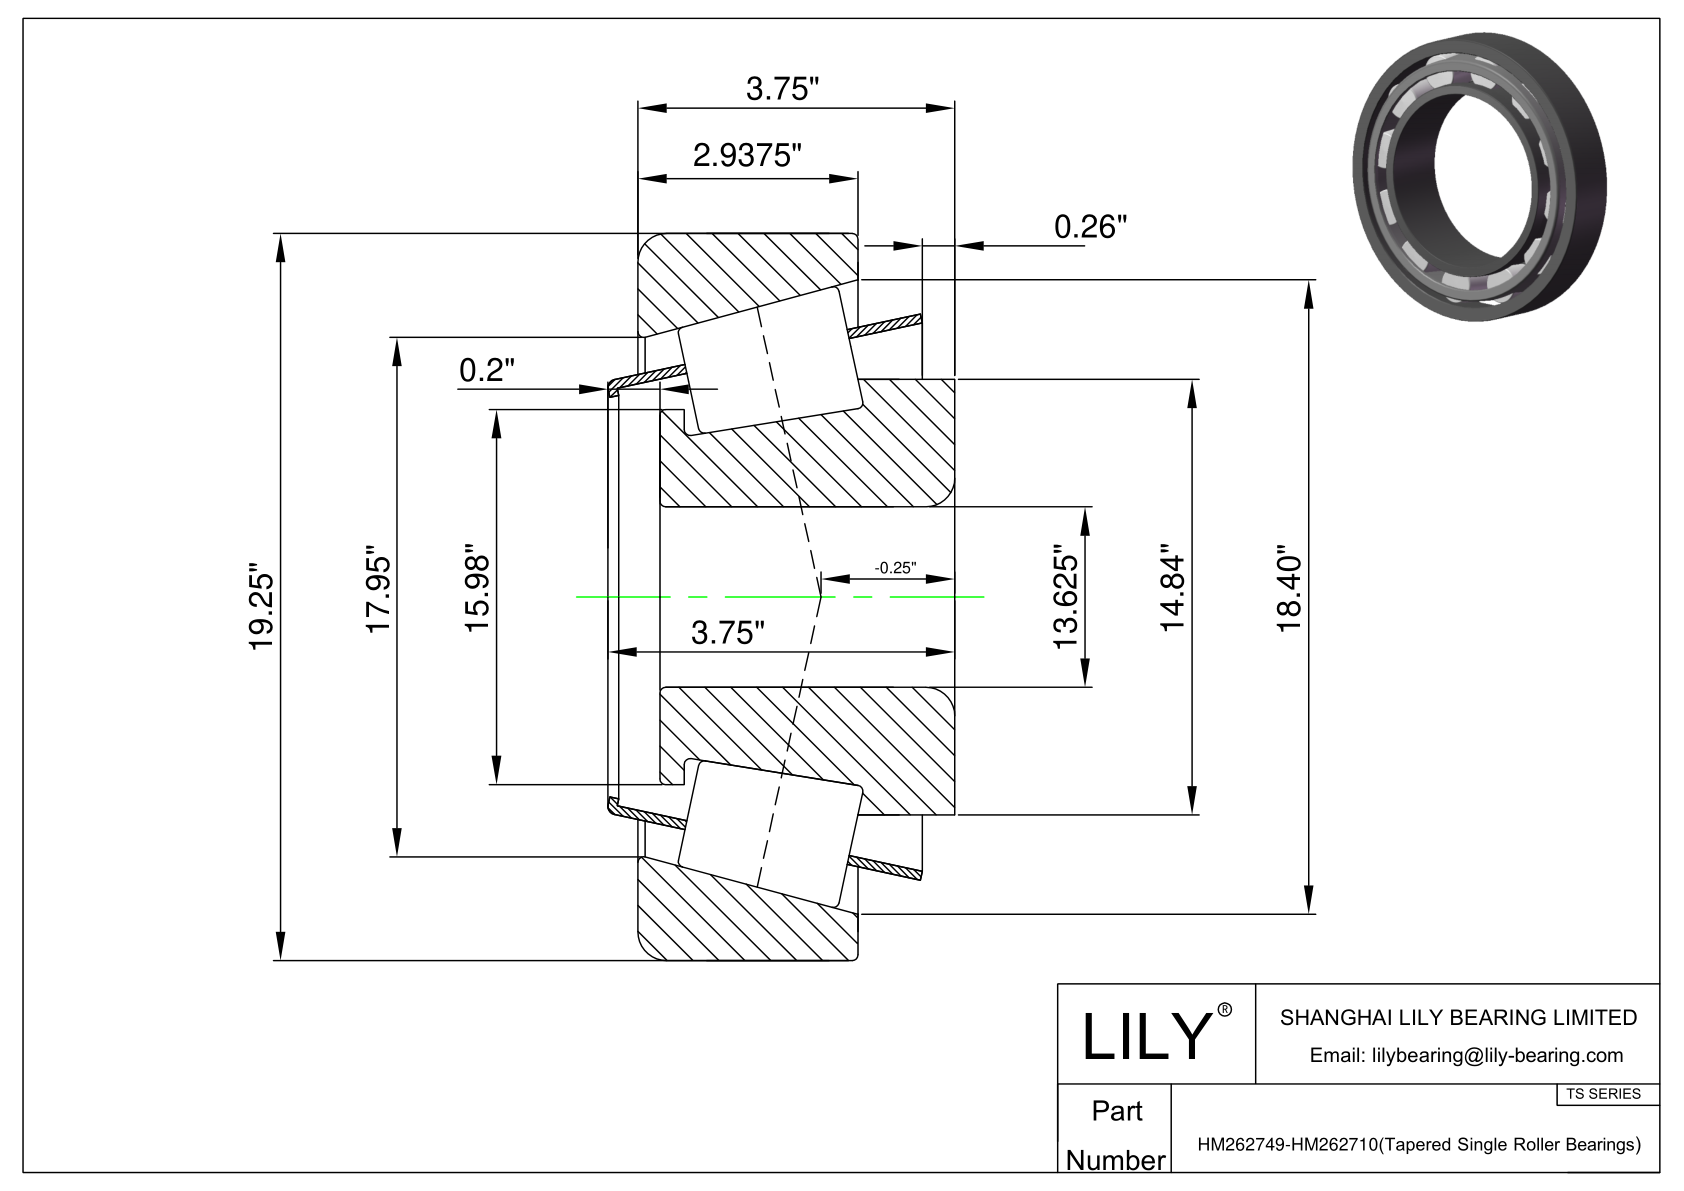 HM262749-HM262710 TS (Tapered Single Roller Bearings) (Imperial) cad drawing